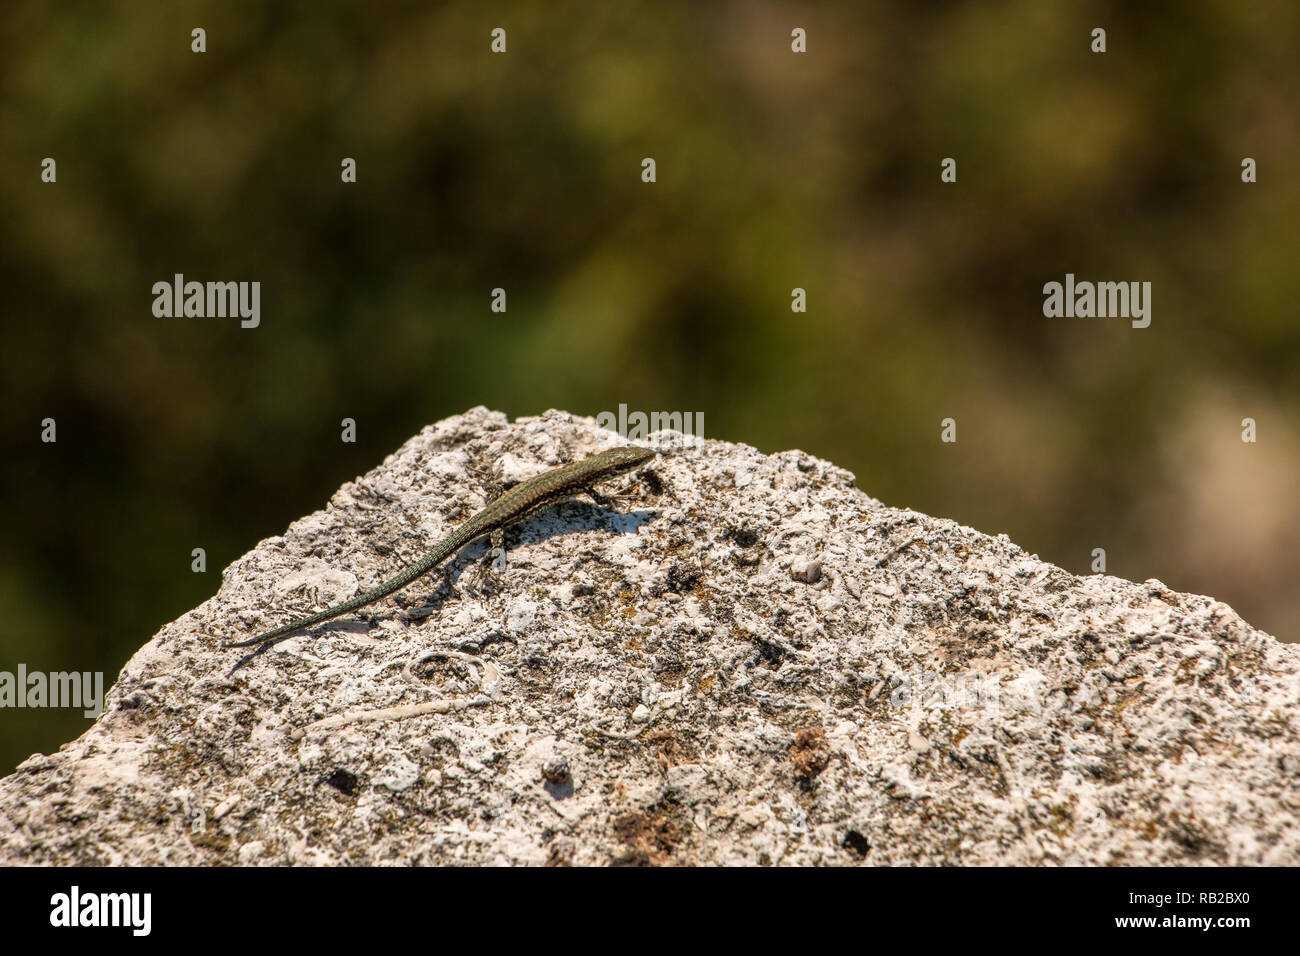 Little lizard on a big rock and blurred background Stock Photo